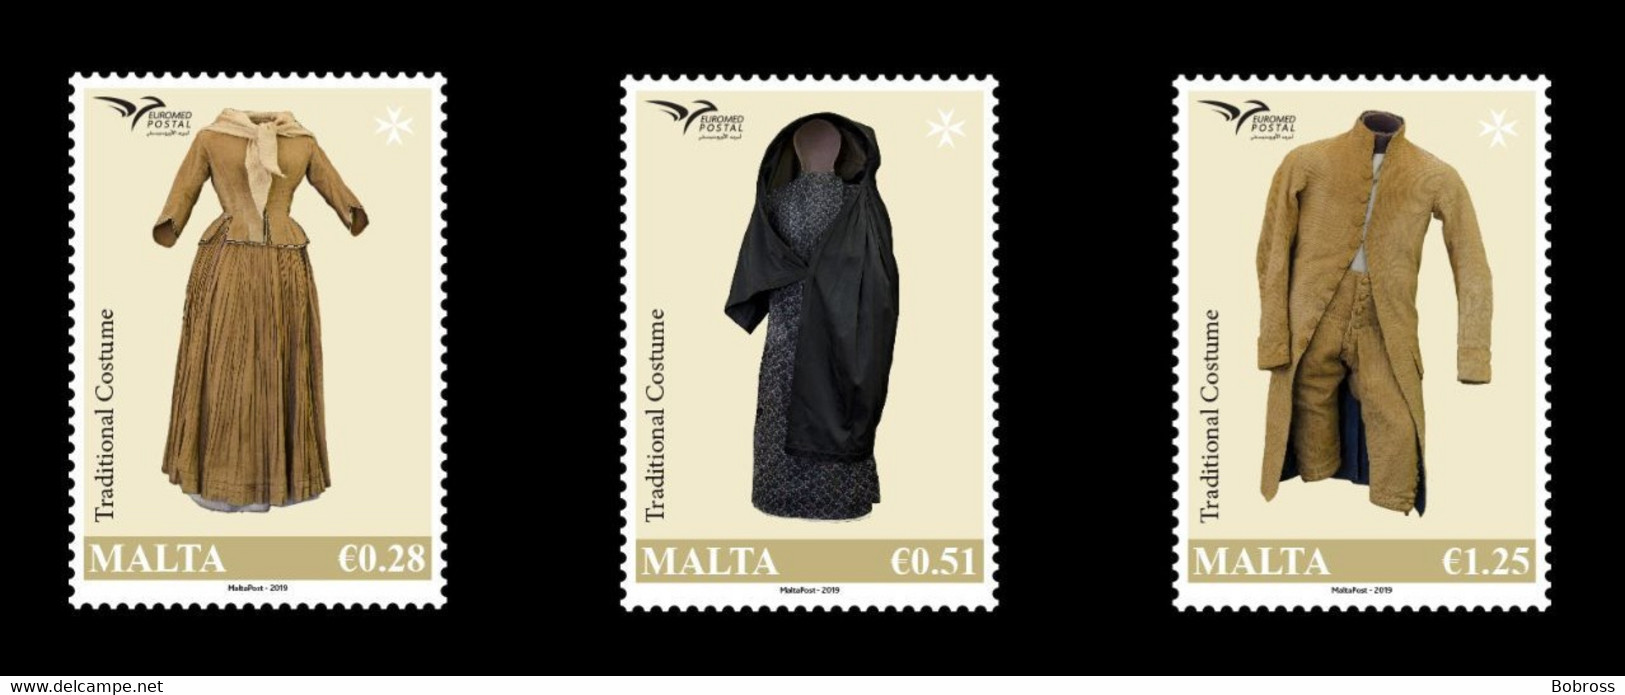 2019 EUROMED Issue - Traditional Costumes, Malta, MNH - Malta